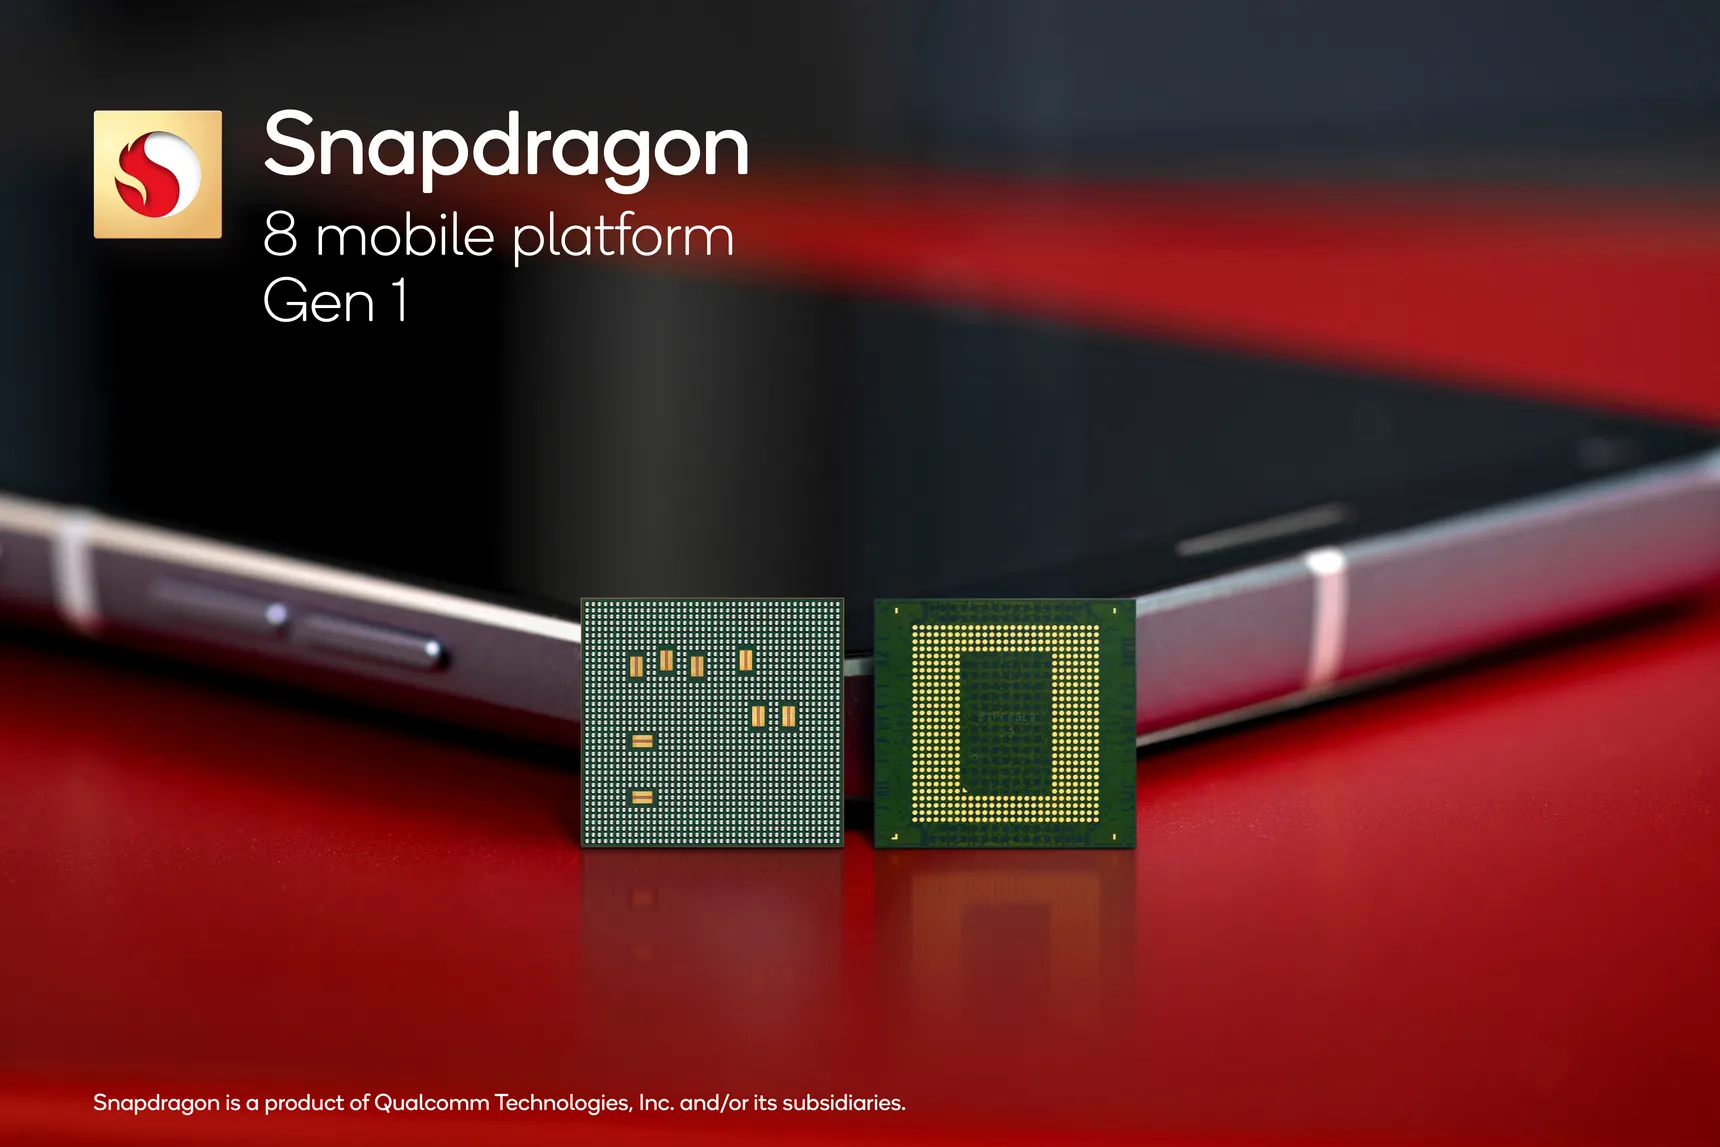 Here are first Android Flagships that'll use Qualcomm's Snapdragon 8 Gen 1